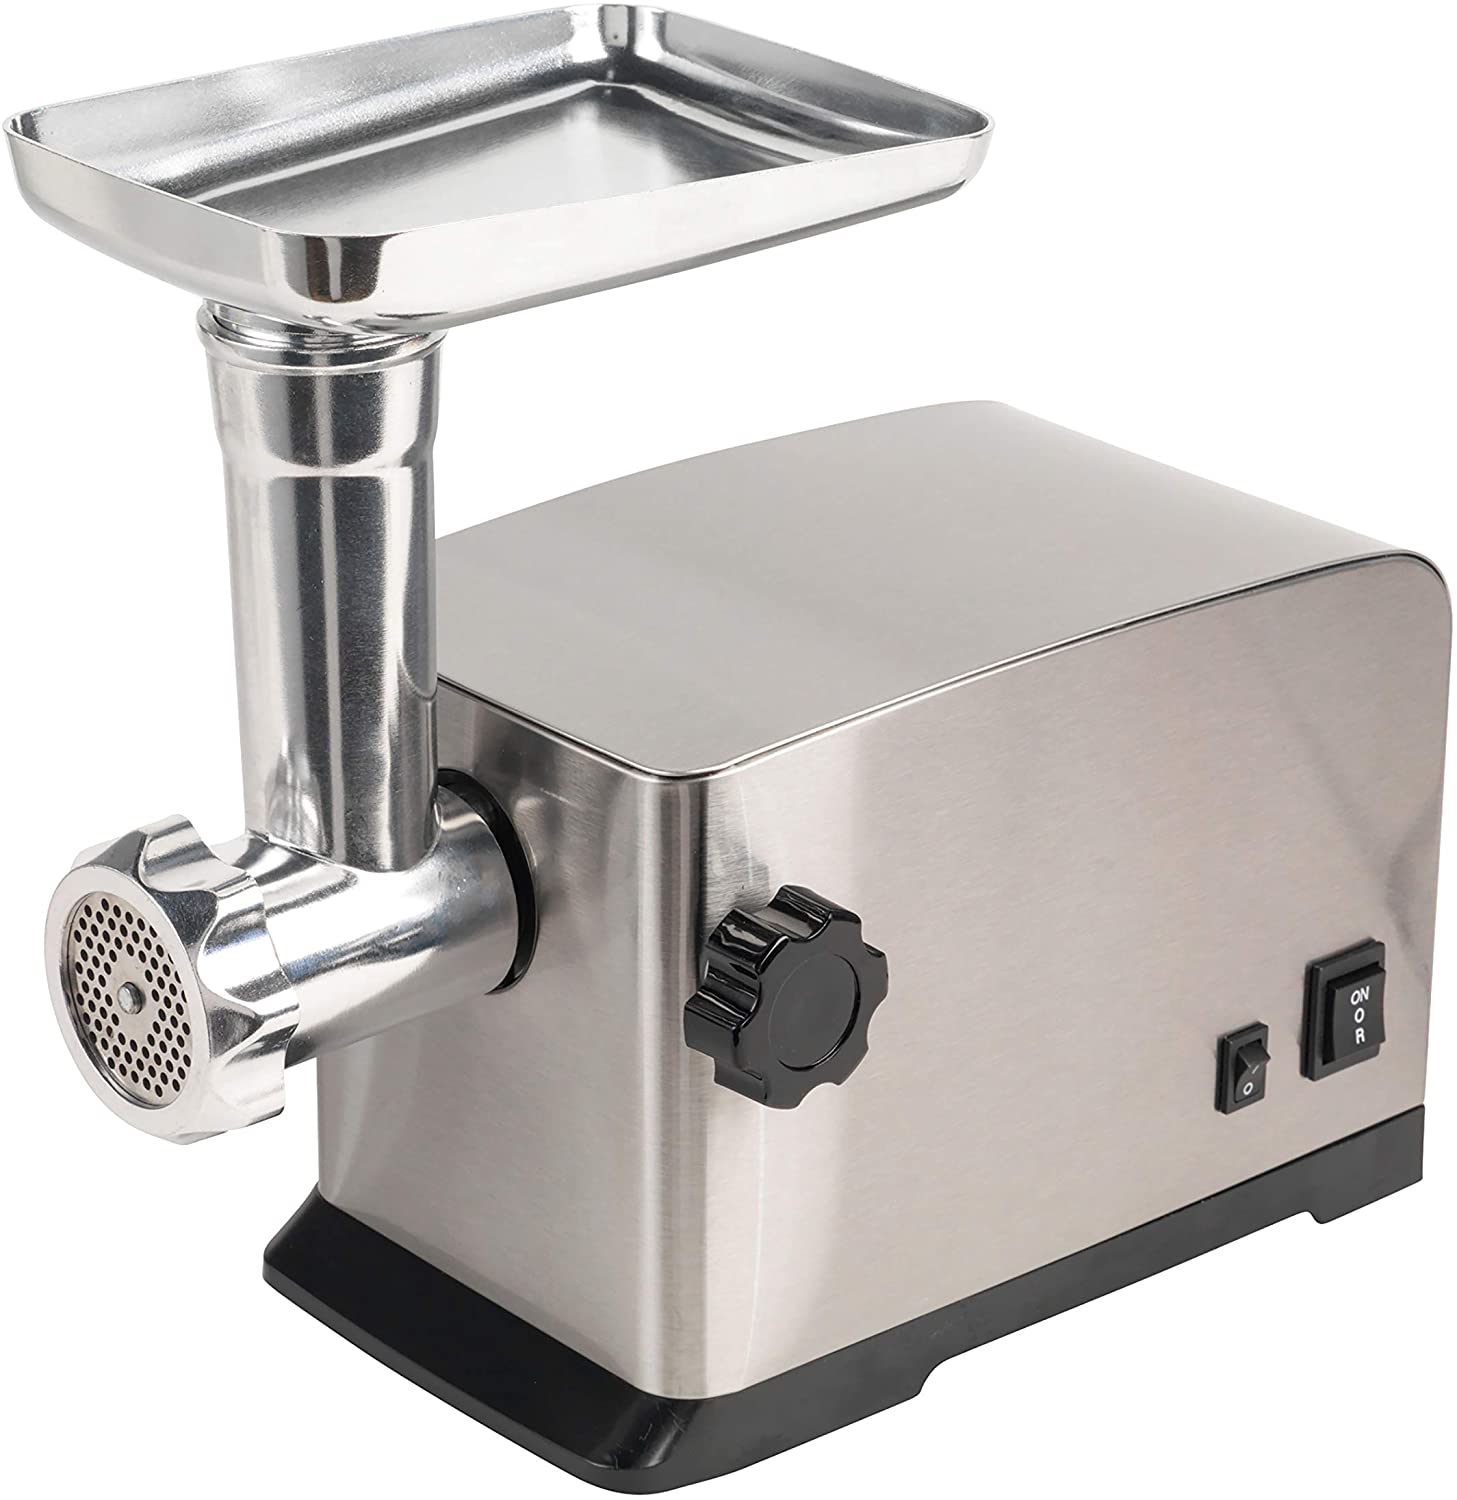 Progress® EK4380PVDEEU7 3-in-1 Electric Meat Grinder with European Plug | 2200W | Stainless Steel Design | With On/Off, Reverse and Forward Functions